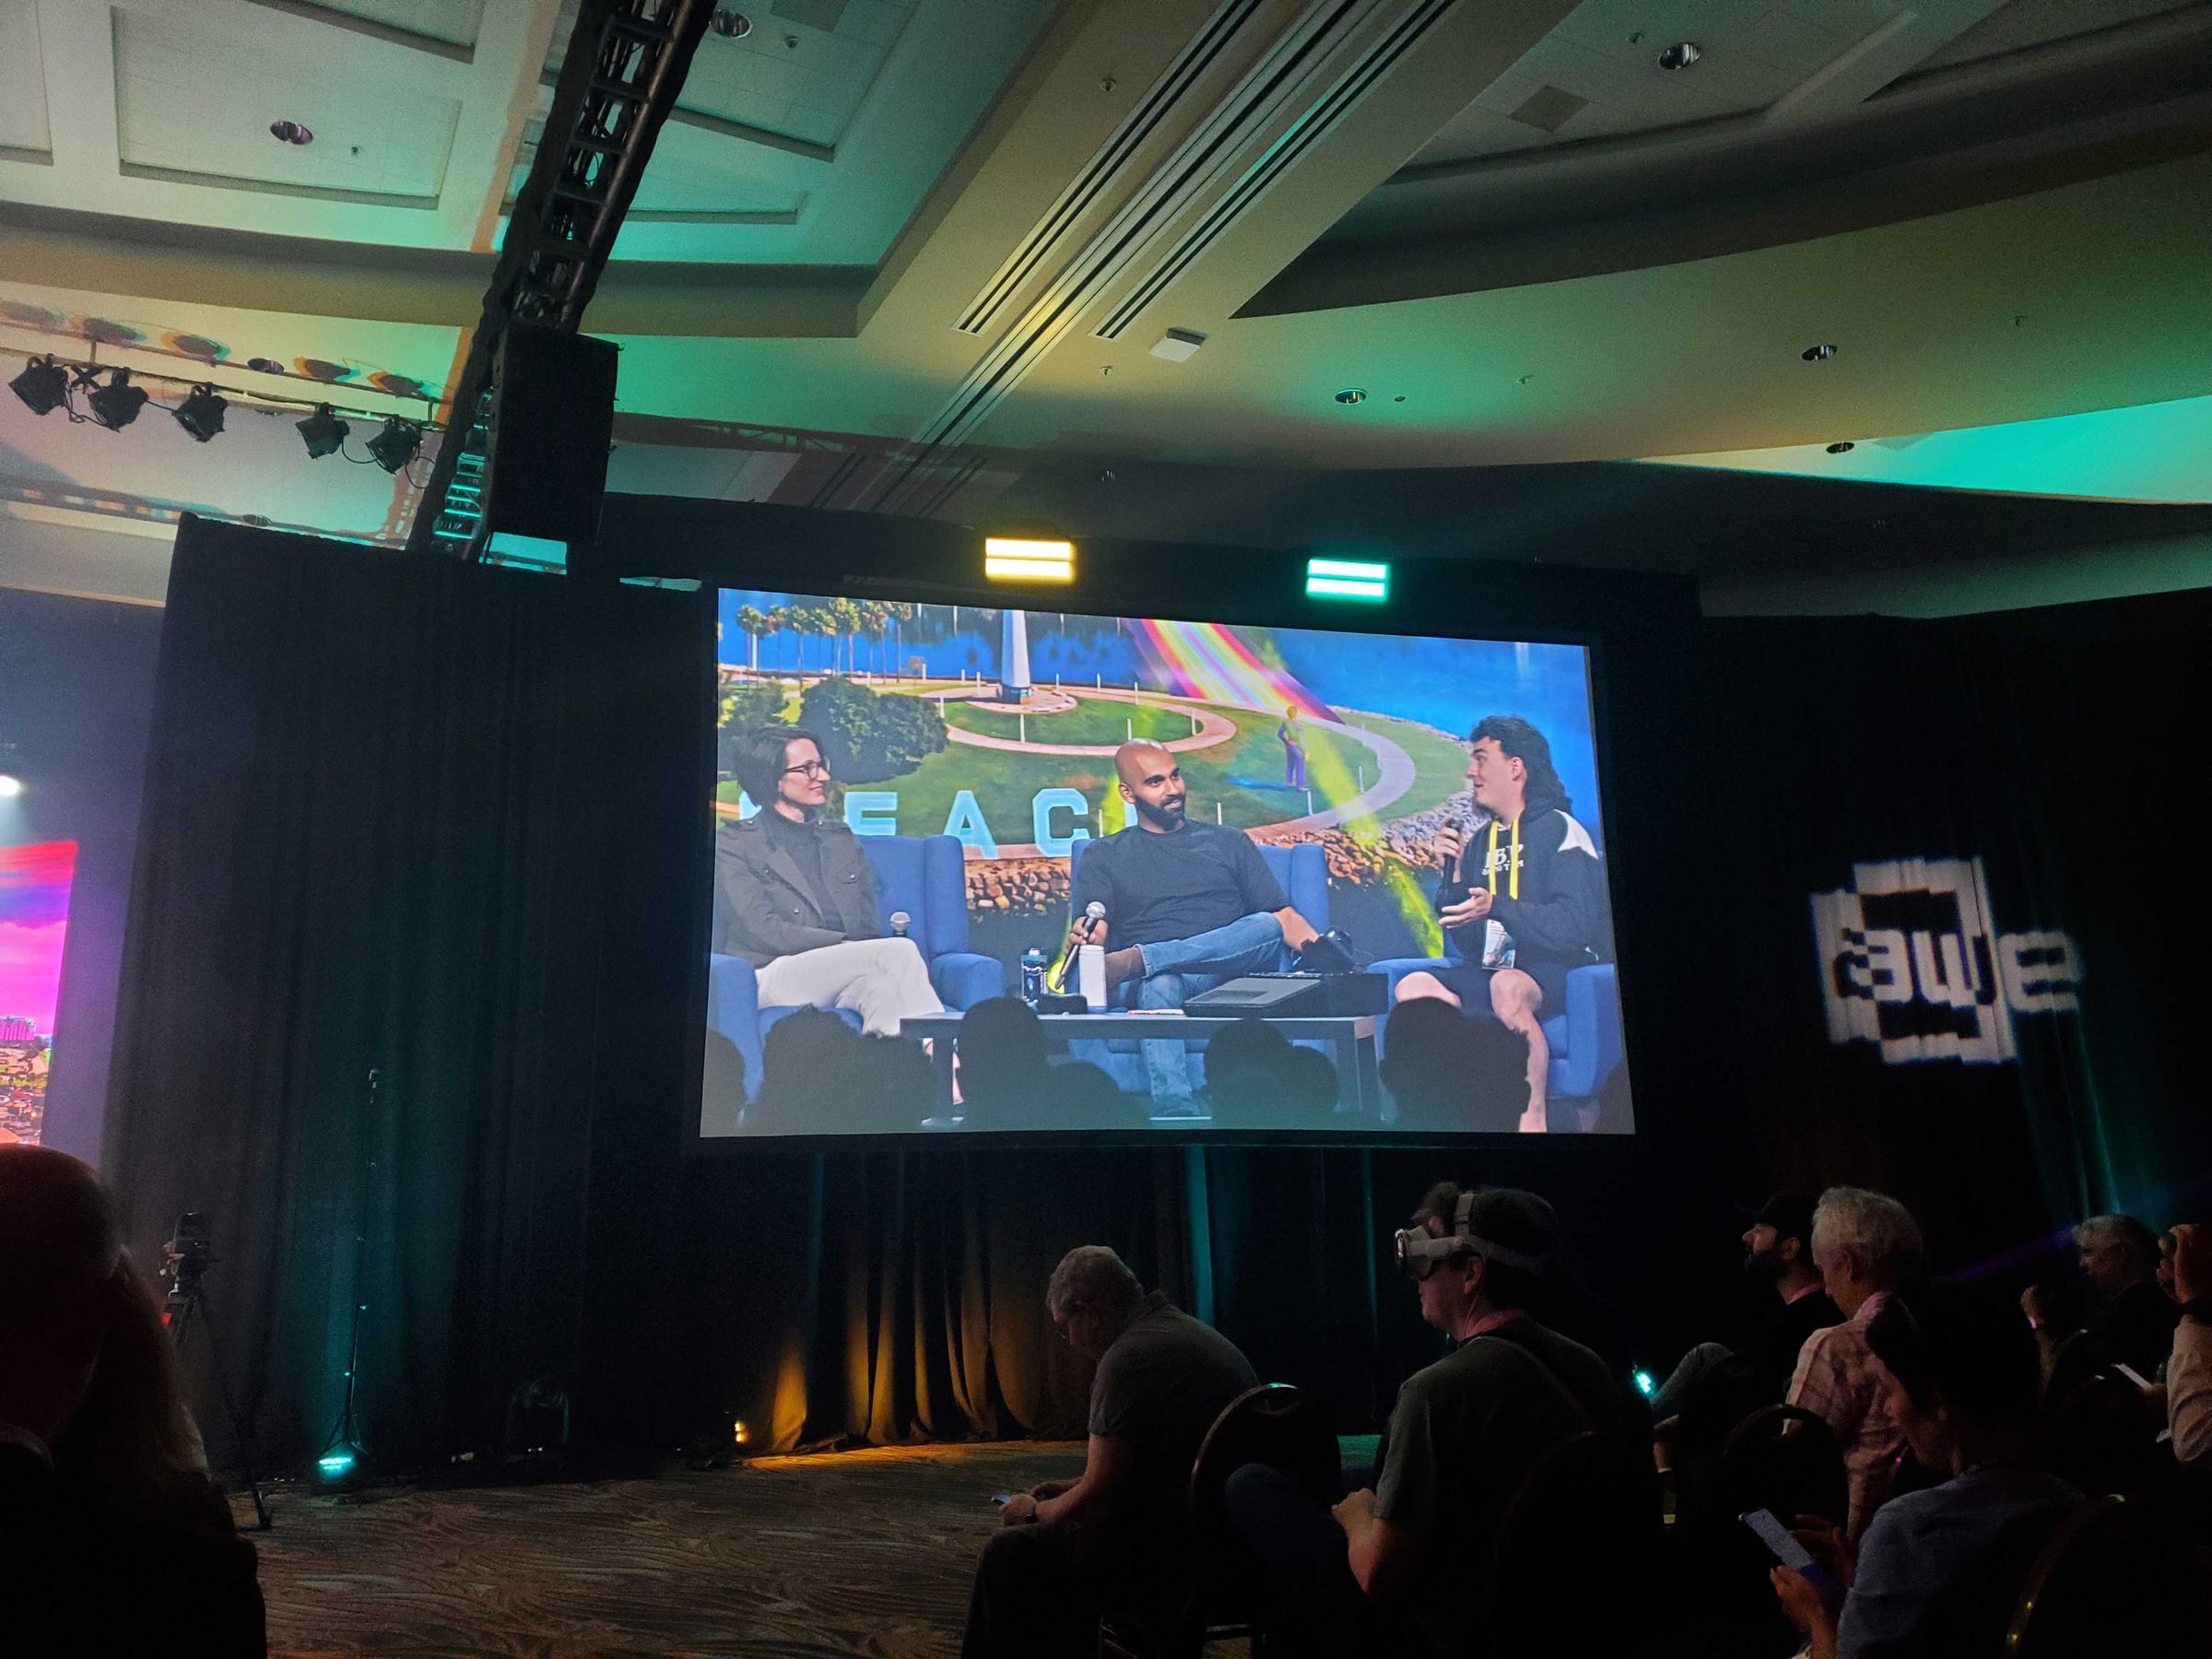 An image of Palmer Luckey and Darshan Shankar with their respective headsets (the DK1 and Bigscreen Beyond) on a panel talk.